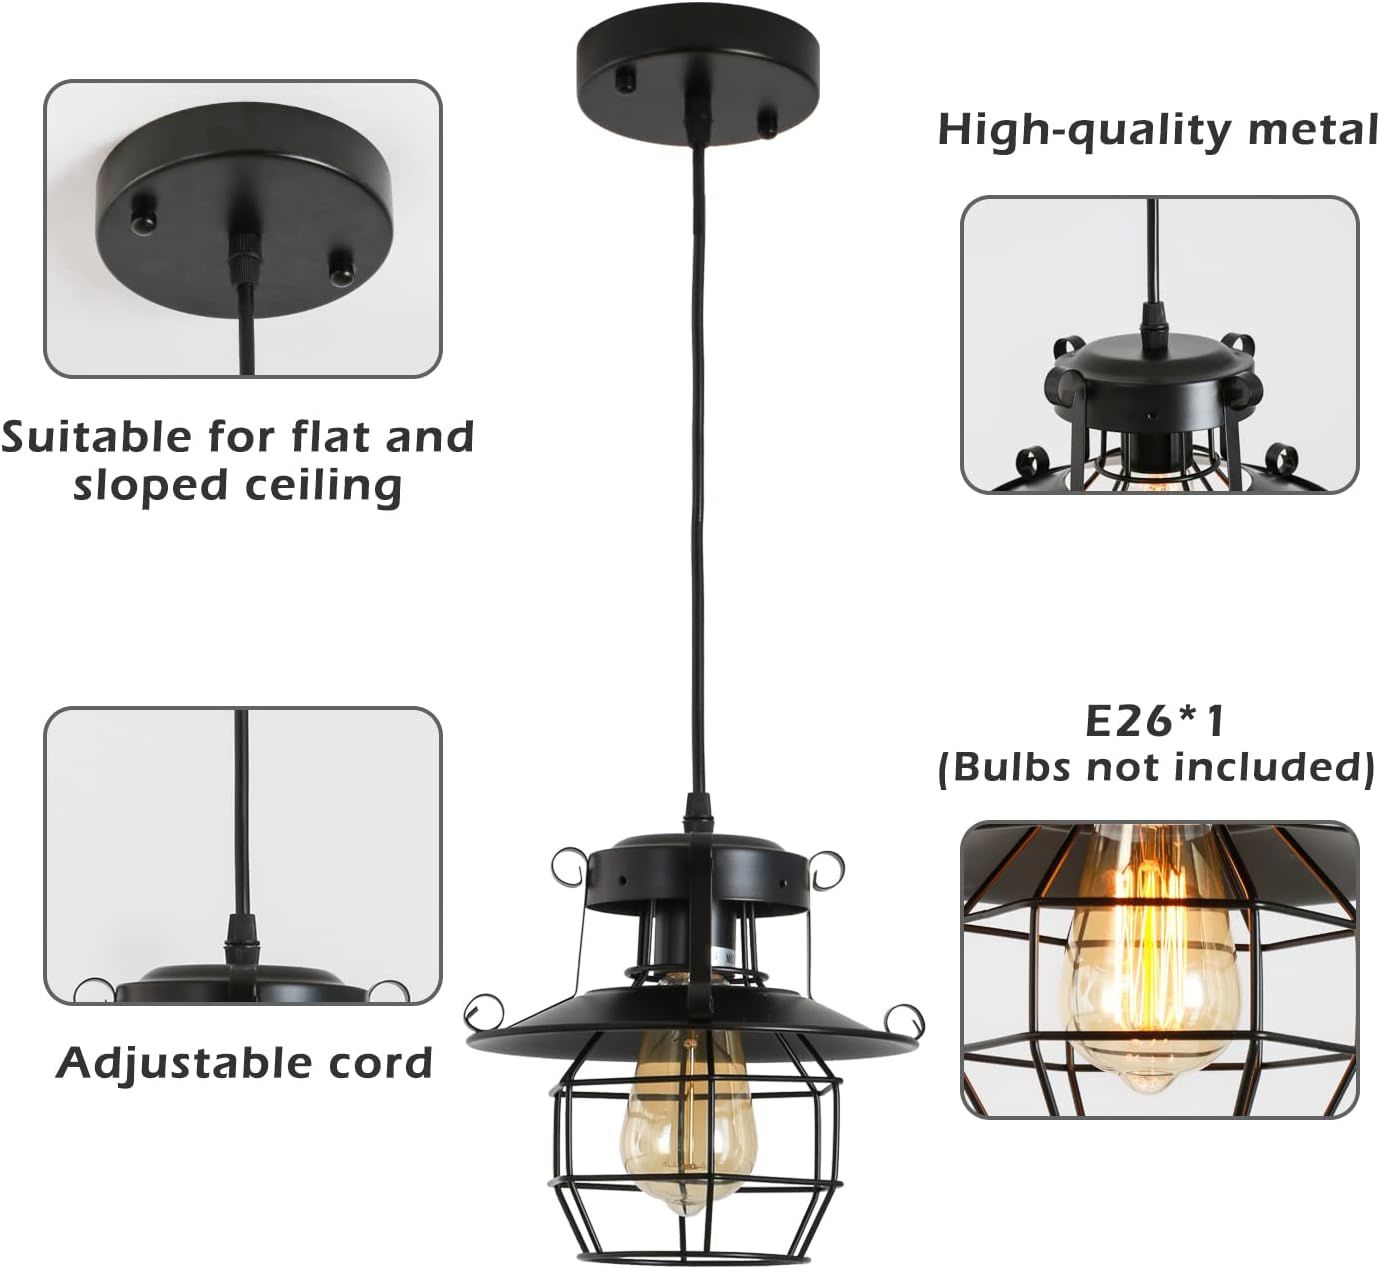 DGY Vintage Farmhouse Pendant Light Rustic Metal Caged Pendant Lights Black Cage Hanging Lamp for Kitchen Island Entryway Bedrooms Living Room Barn,Adjustable Height E26 Bulb(1 Light) Home Decor by Design